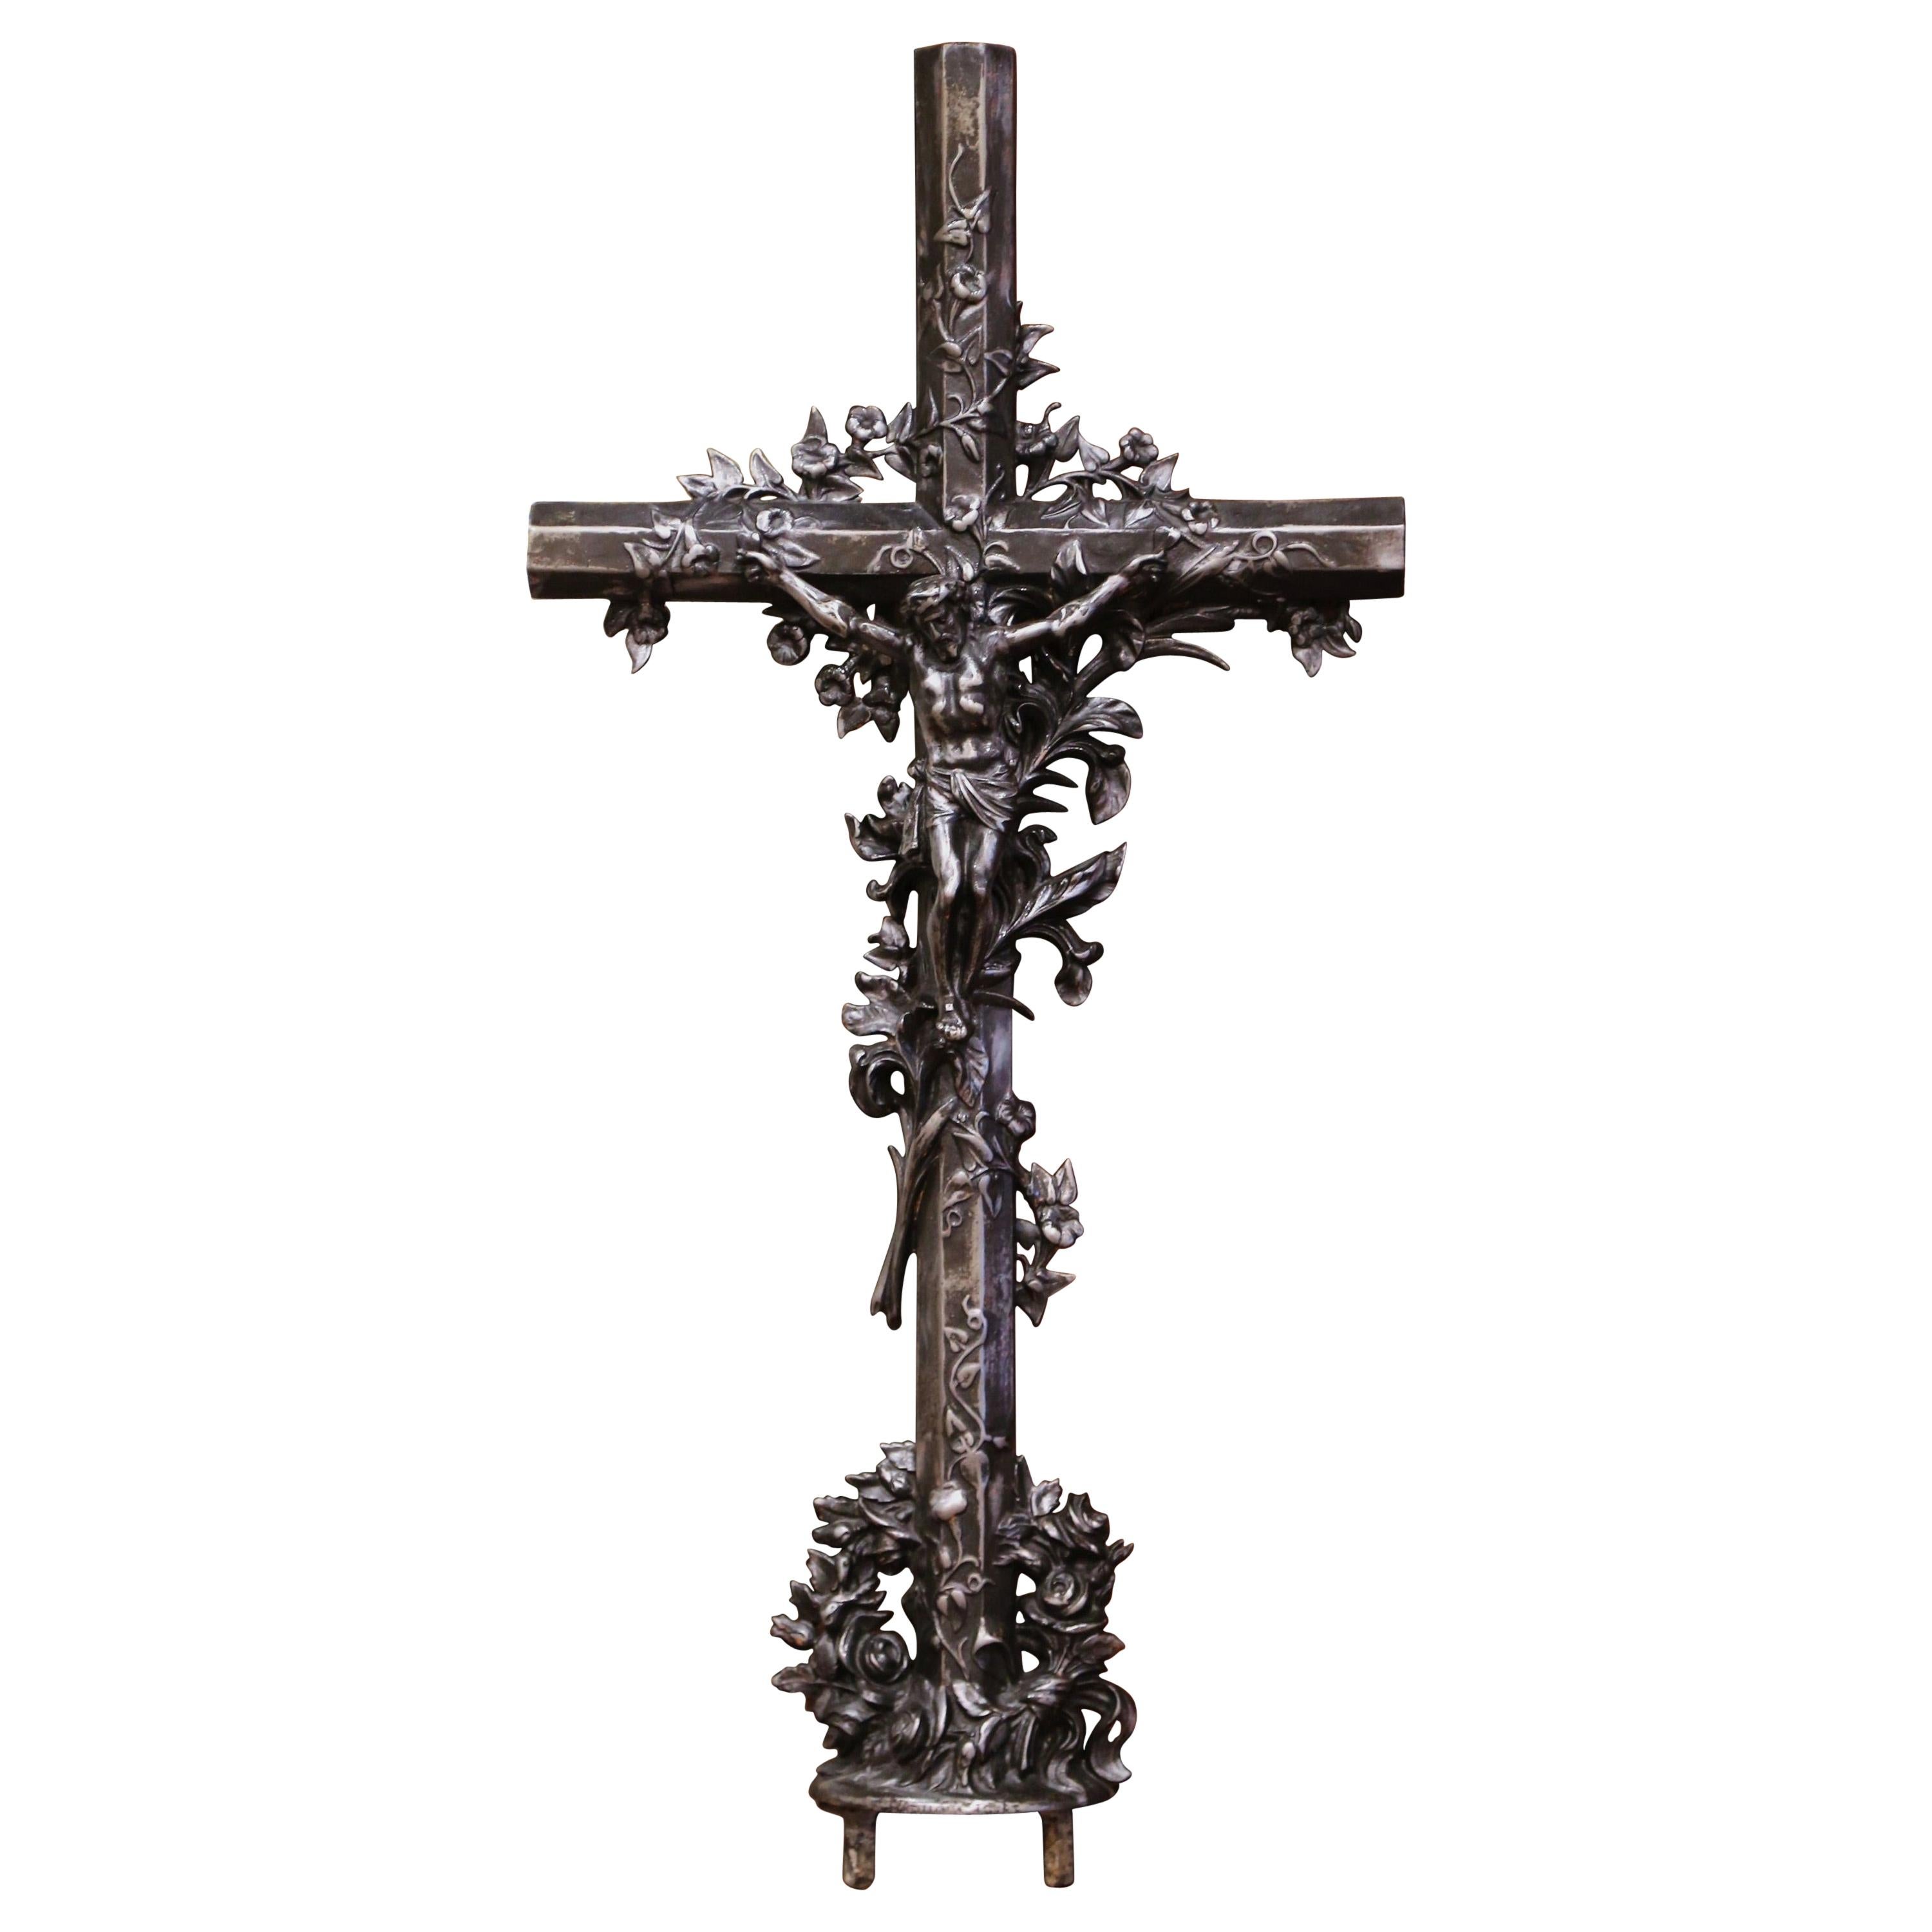 19th Century French Polished Iron Garden Crucifix Cross with Floral Motifs